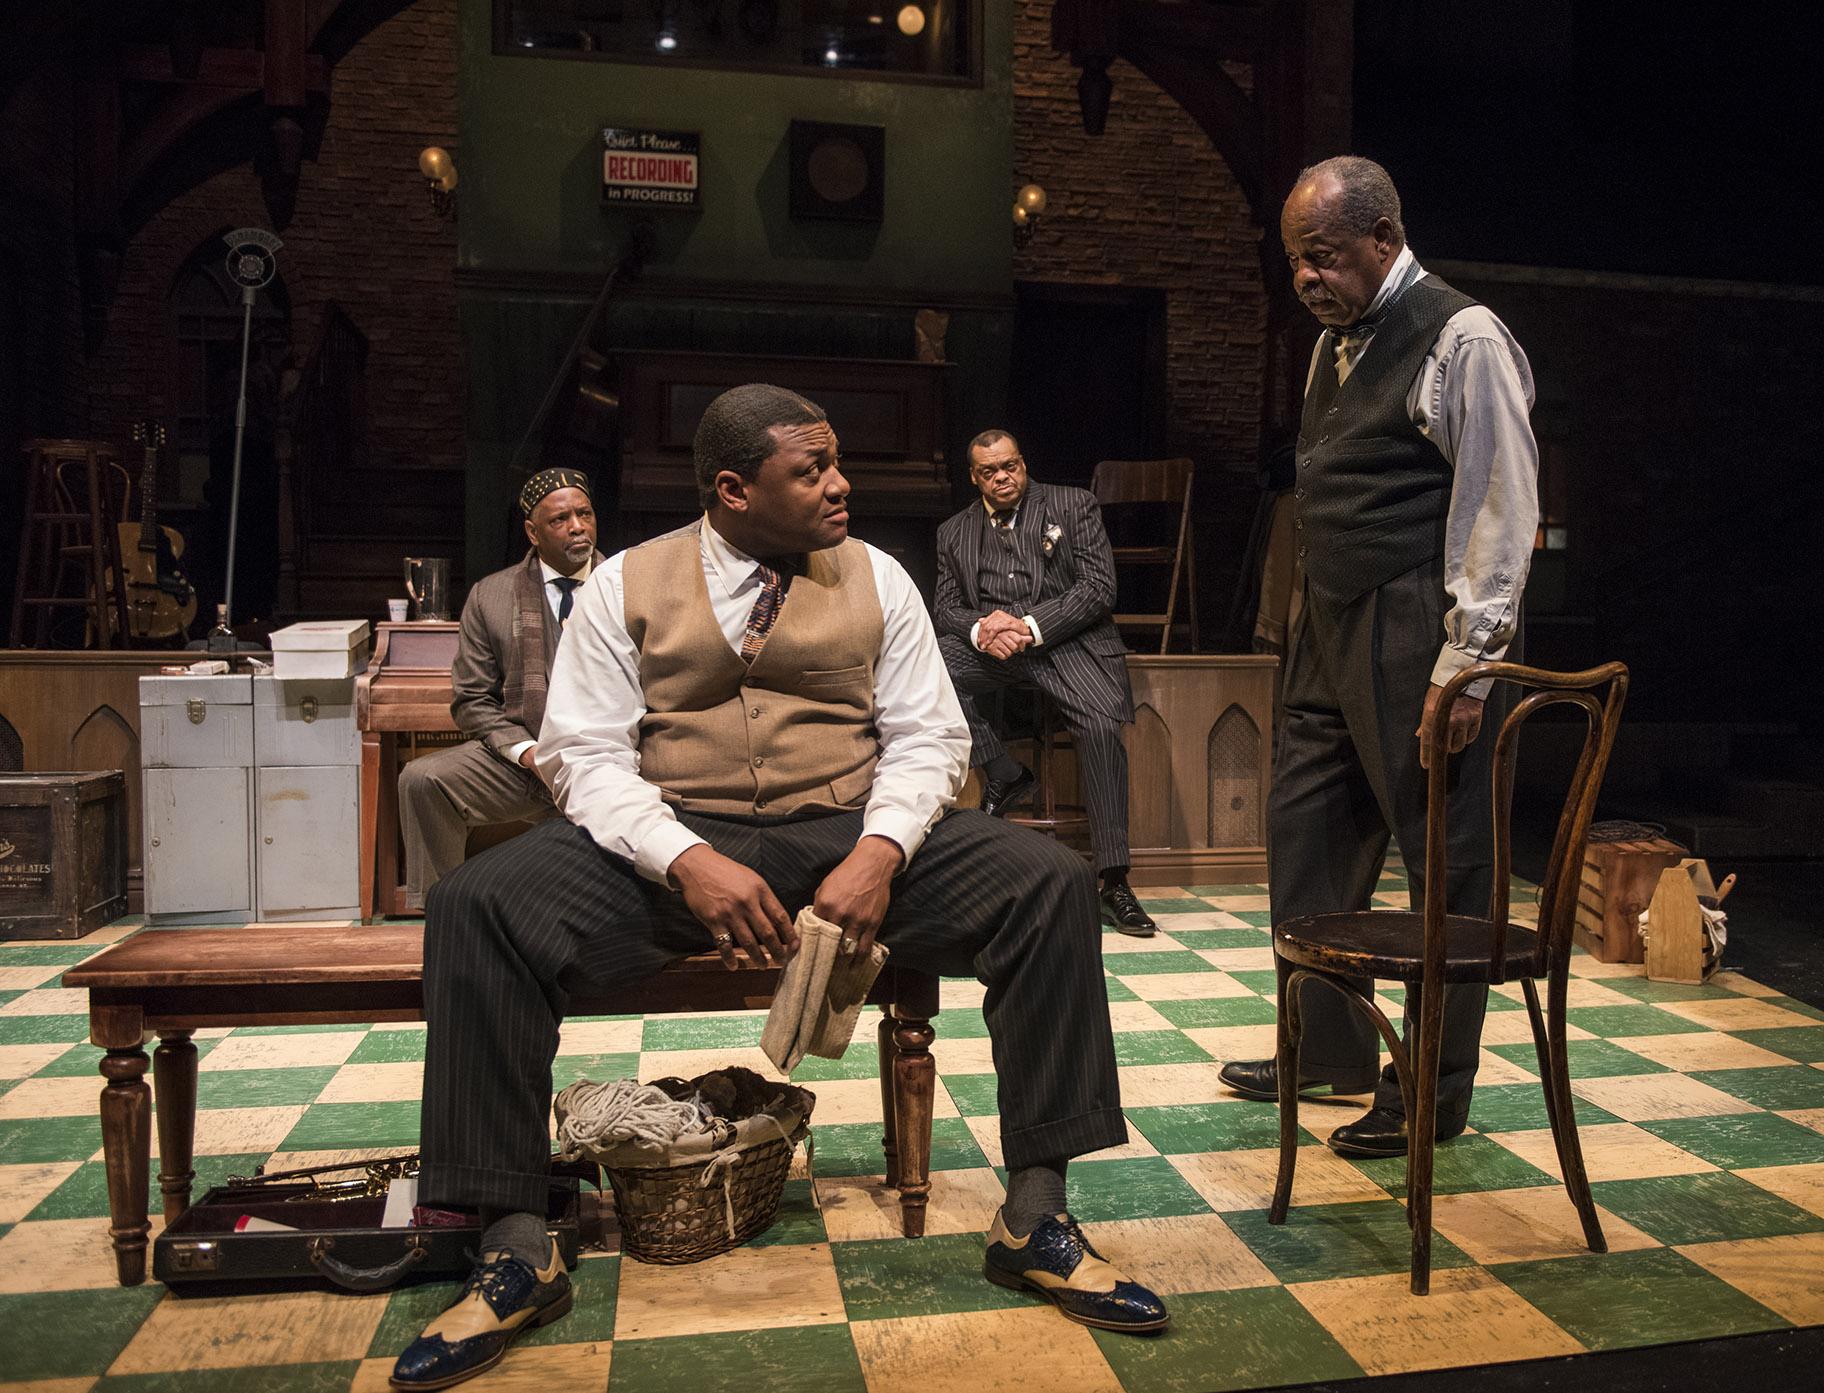 From left: David Alan Anderson, Kelvin Roston, Jr., A.C. Smith and Alfred H. Wilson in “Ma Rainey’s Black Bottom” at Writers Theatre. (Photo credit: Michael Brosilow)